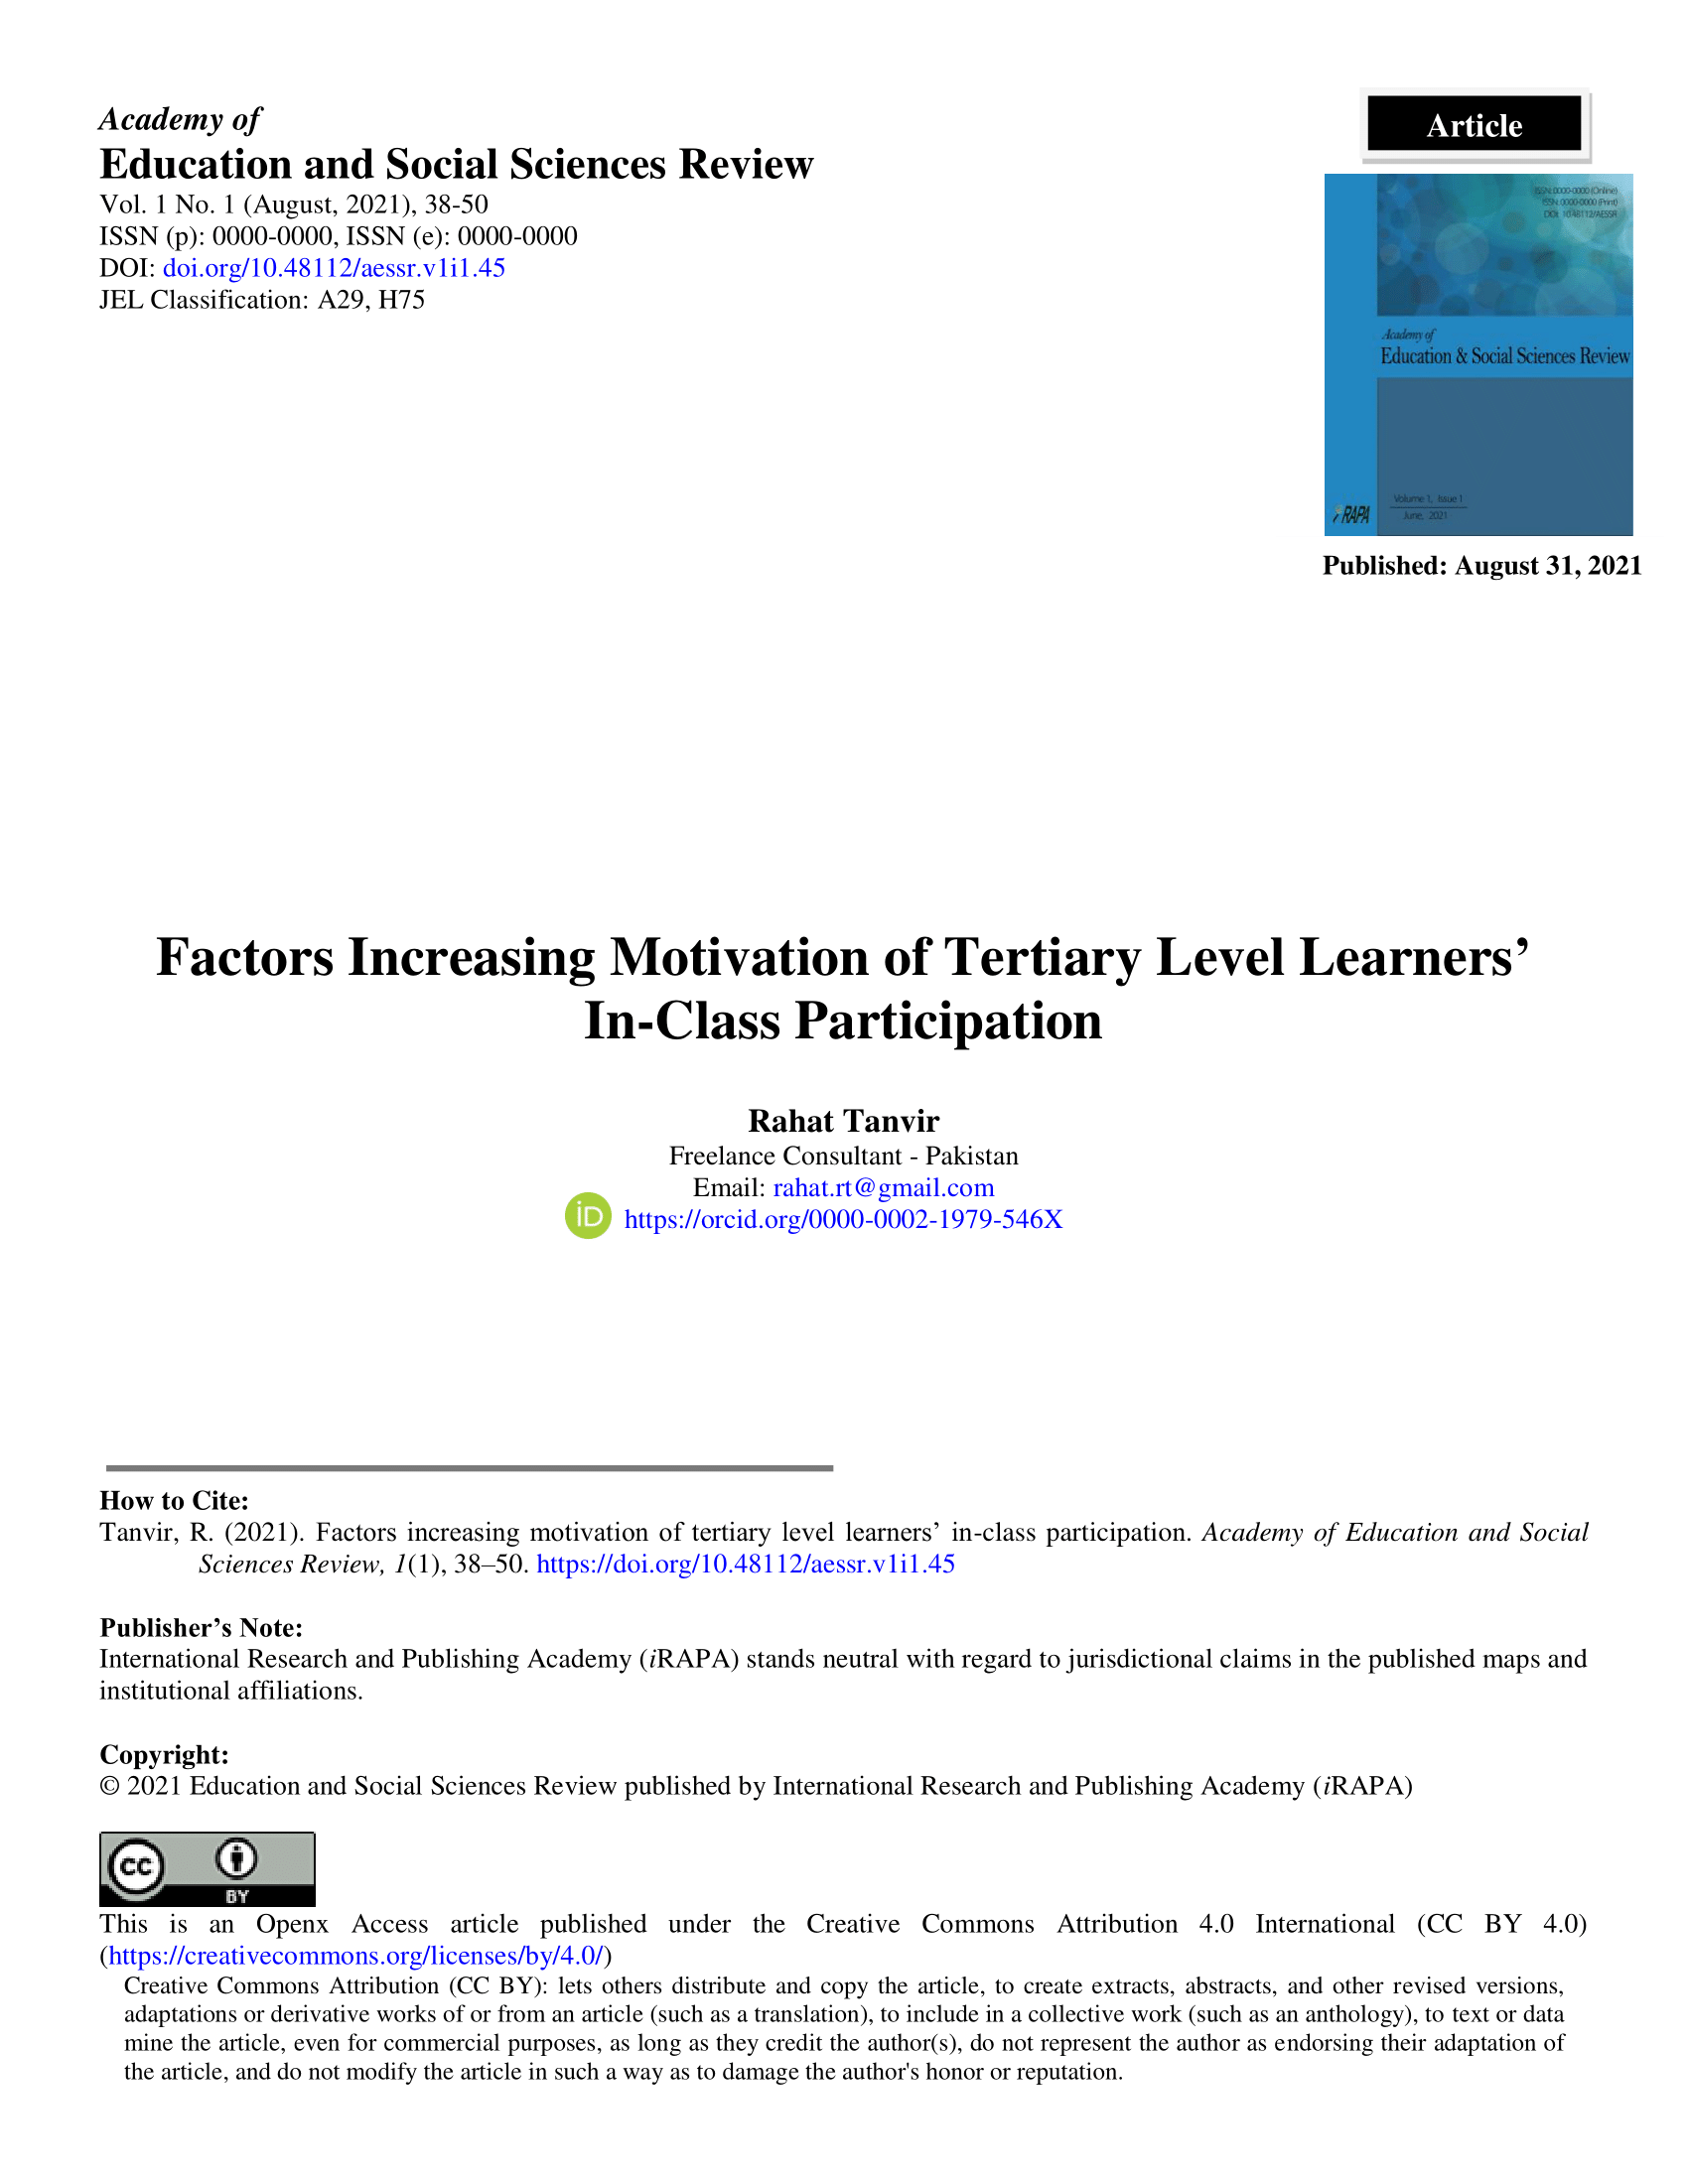  Factors Increasing Motivation of Tertiary Level Learners’ In-Class Participation